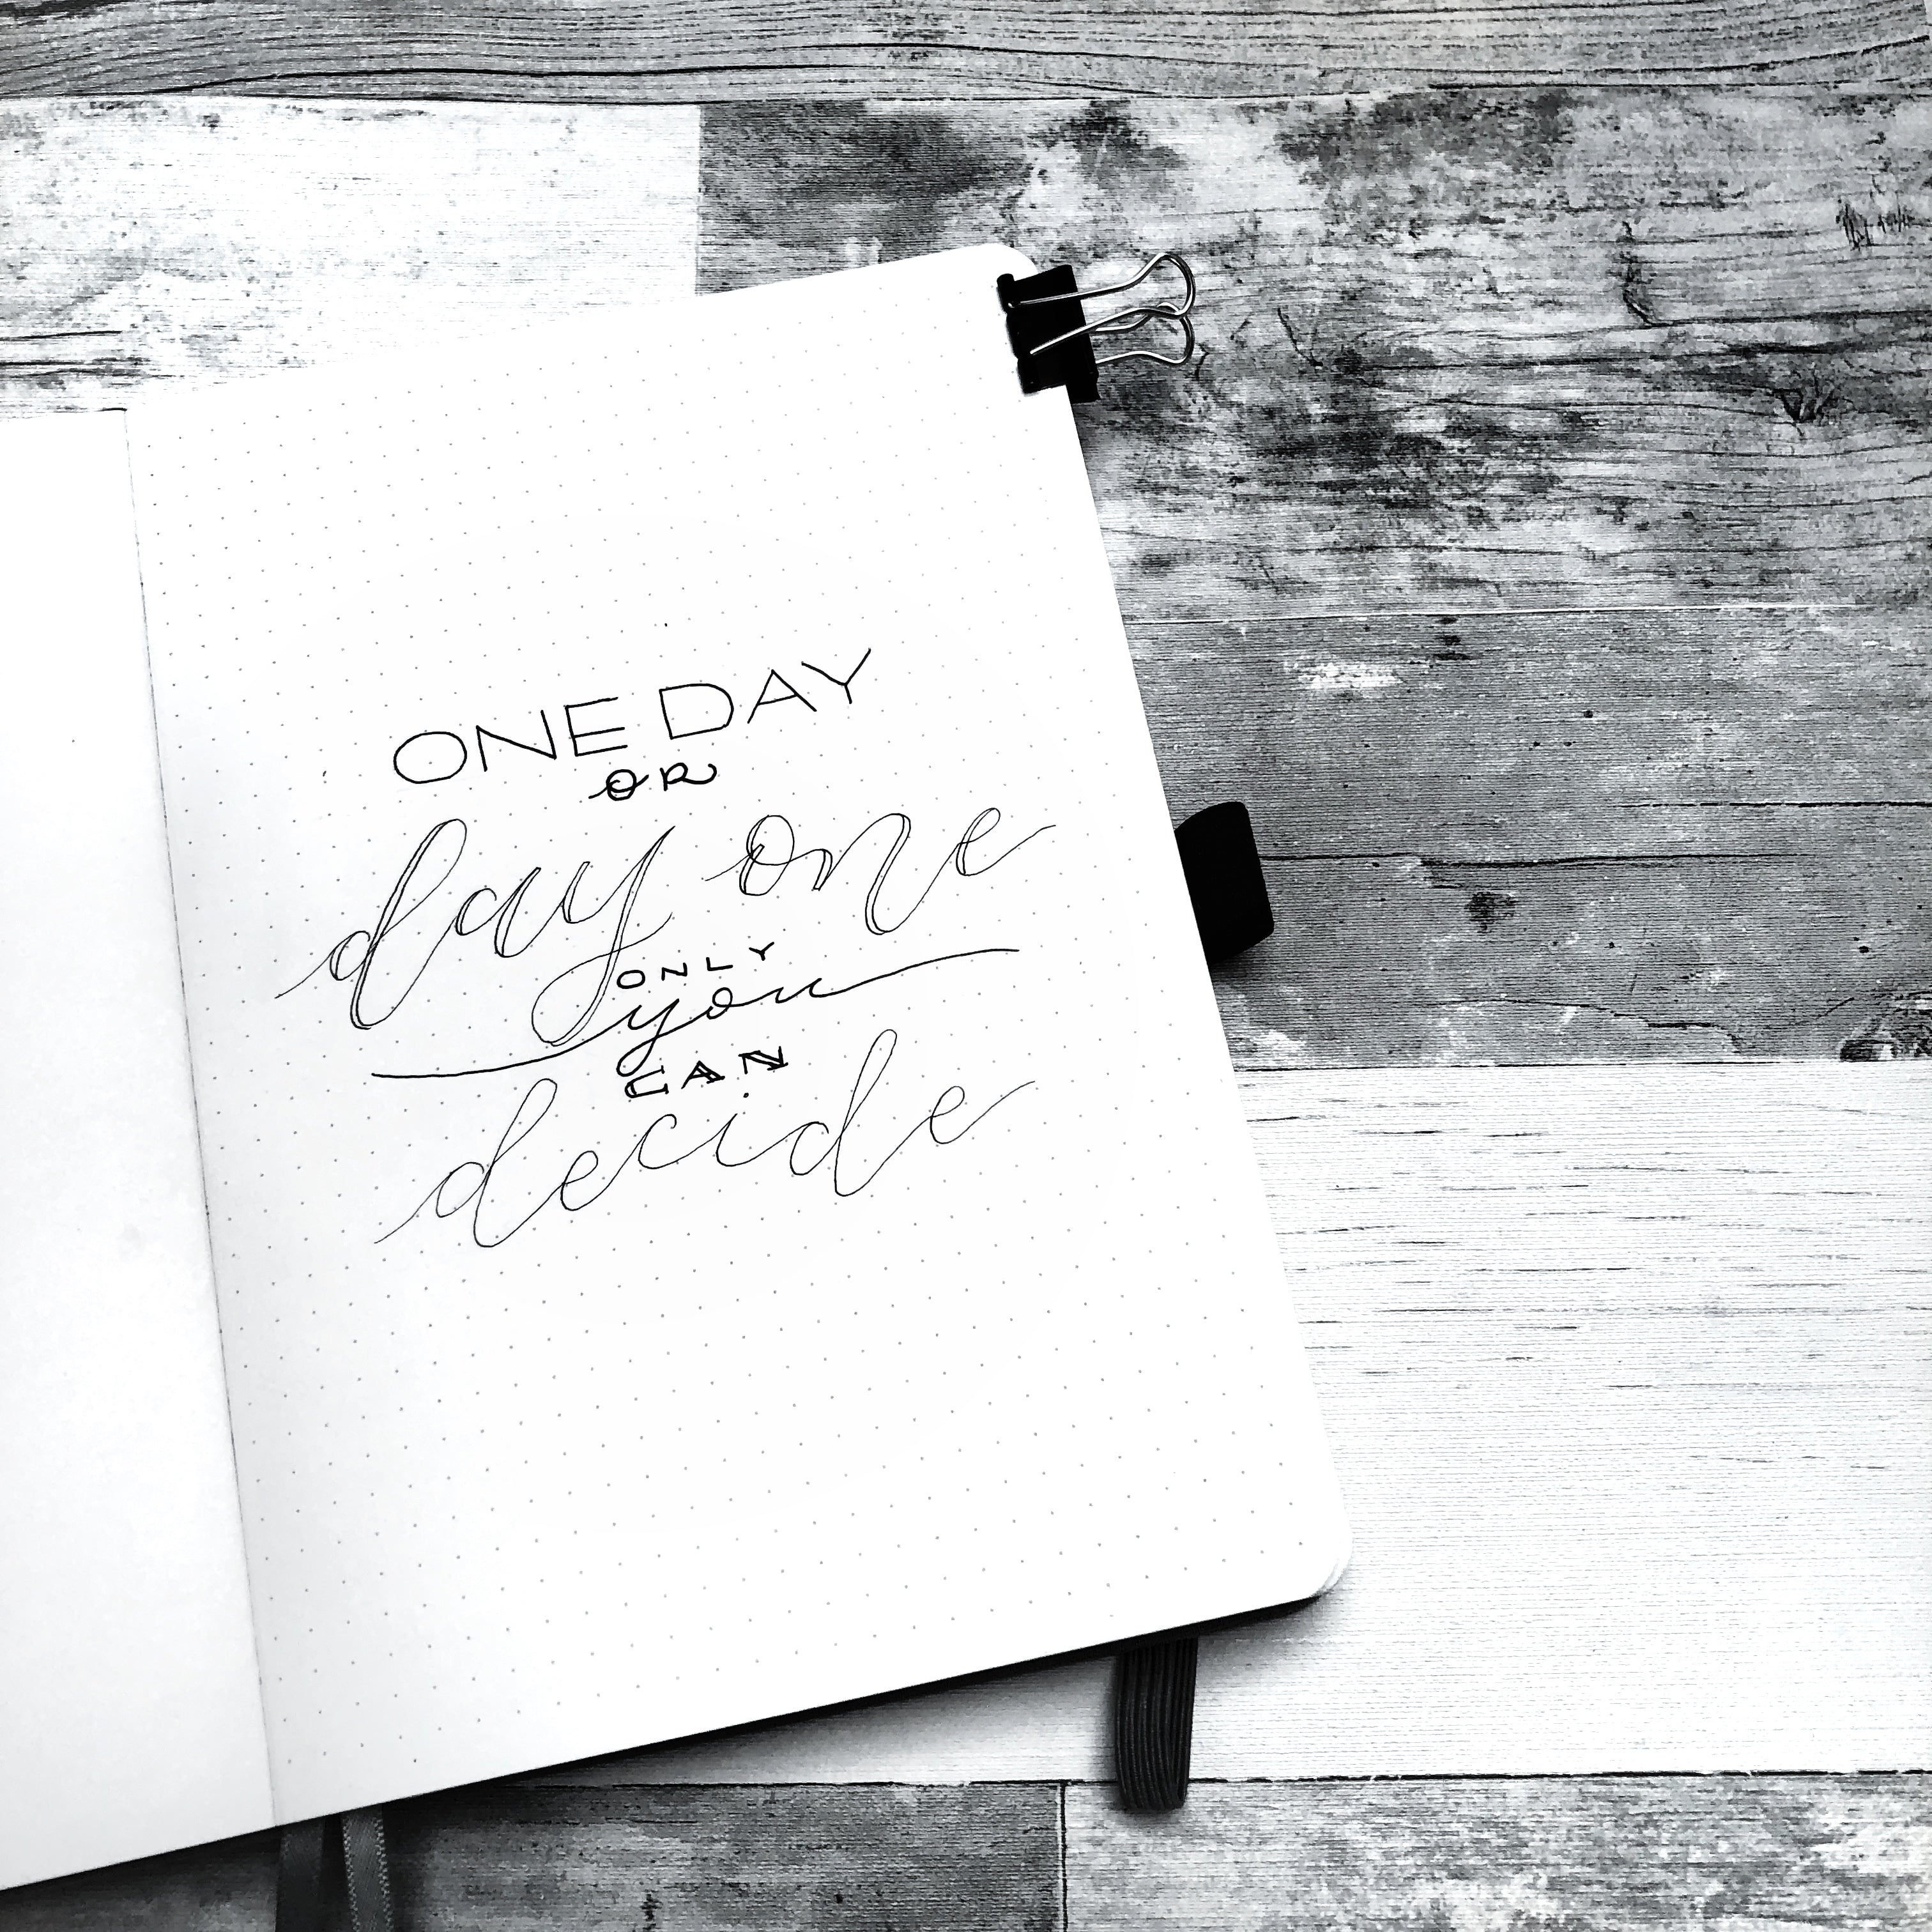 quote page: day one or one day - you decide